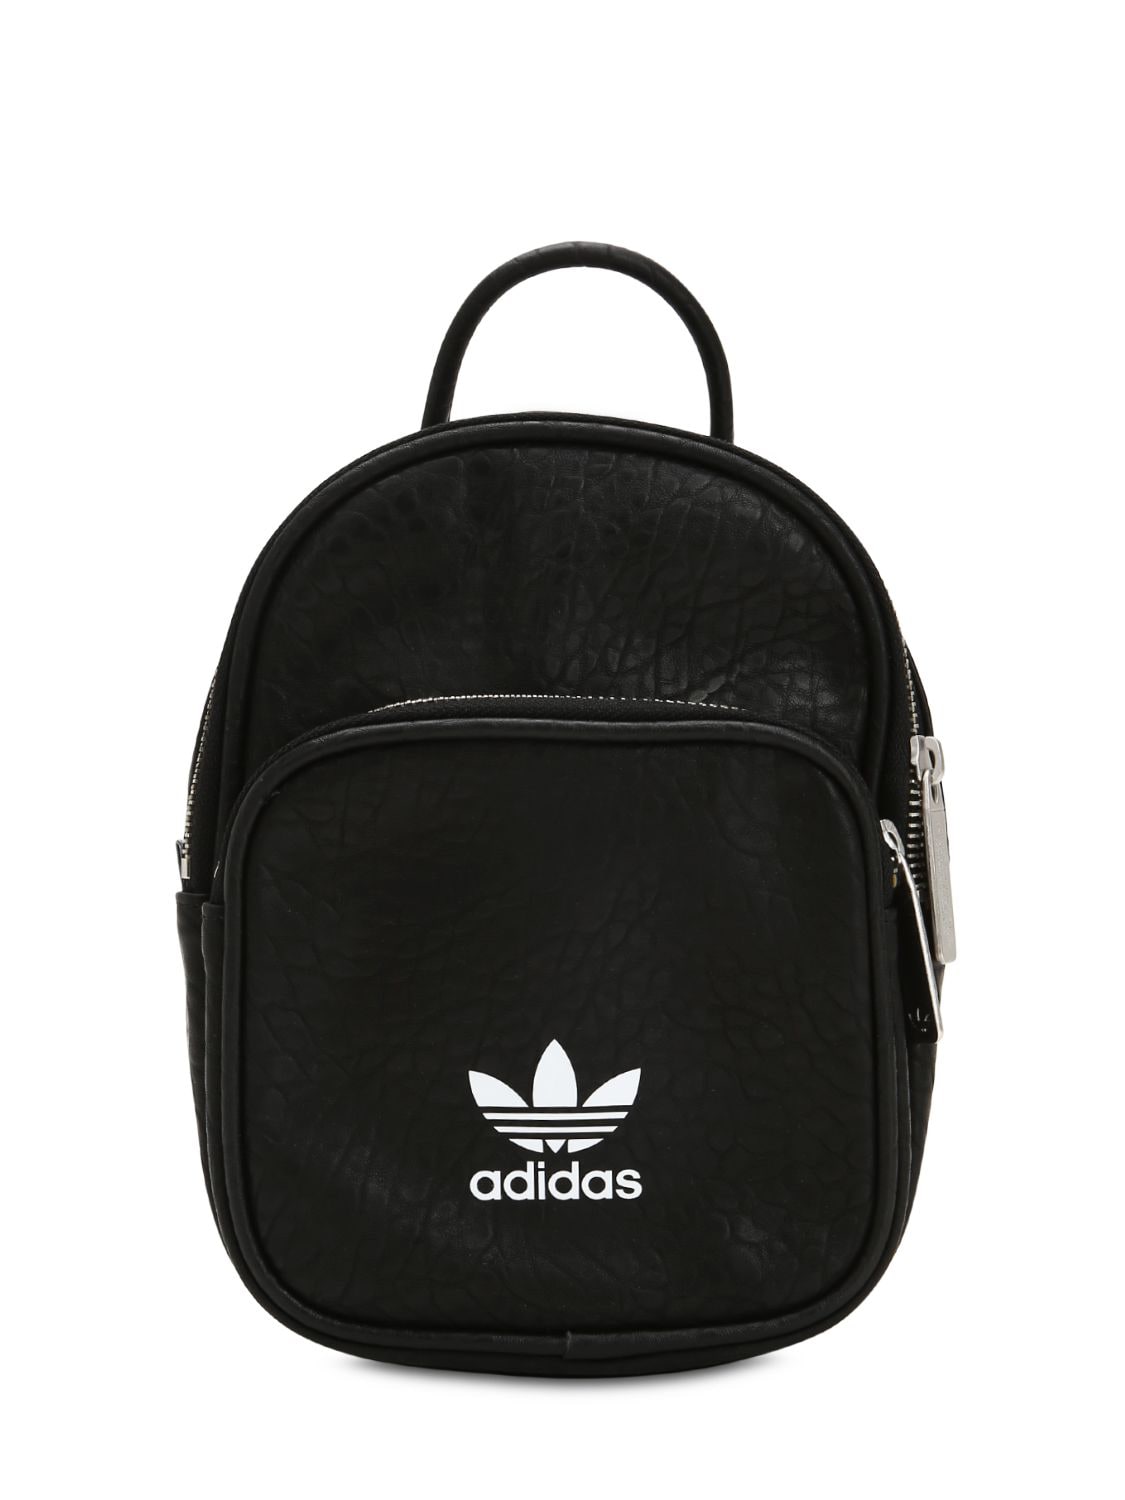 Adidas Originals Mini Classic Faux Leather Backpack In Black